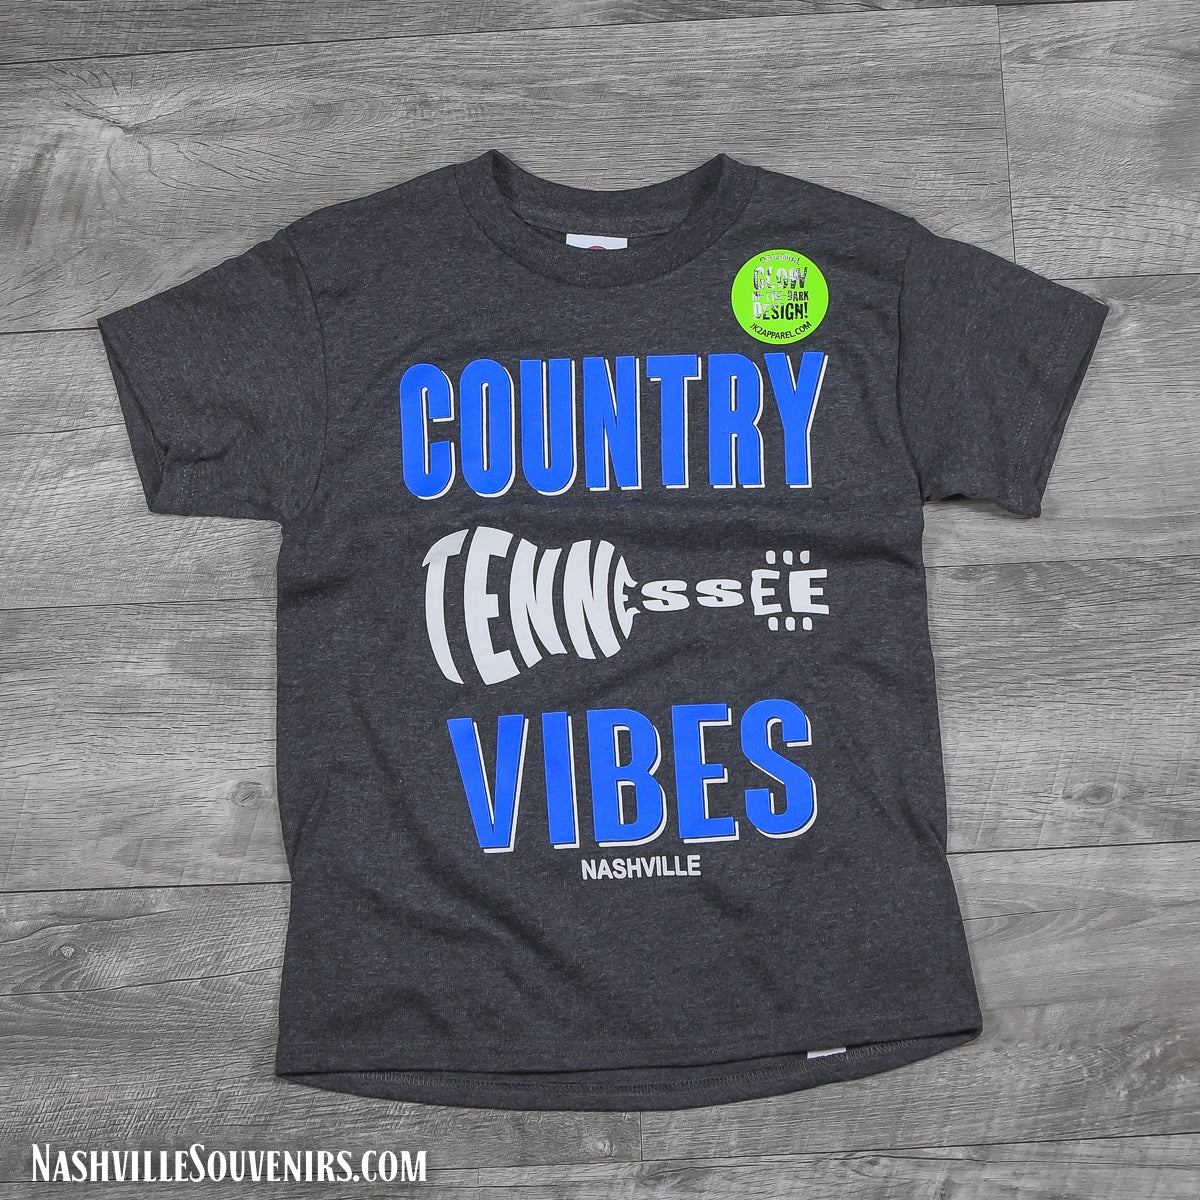 Country Tennessee Vibes Nashville Youth T-Shirt